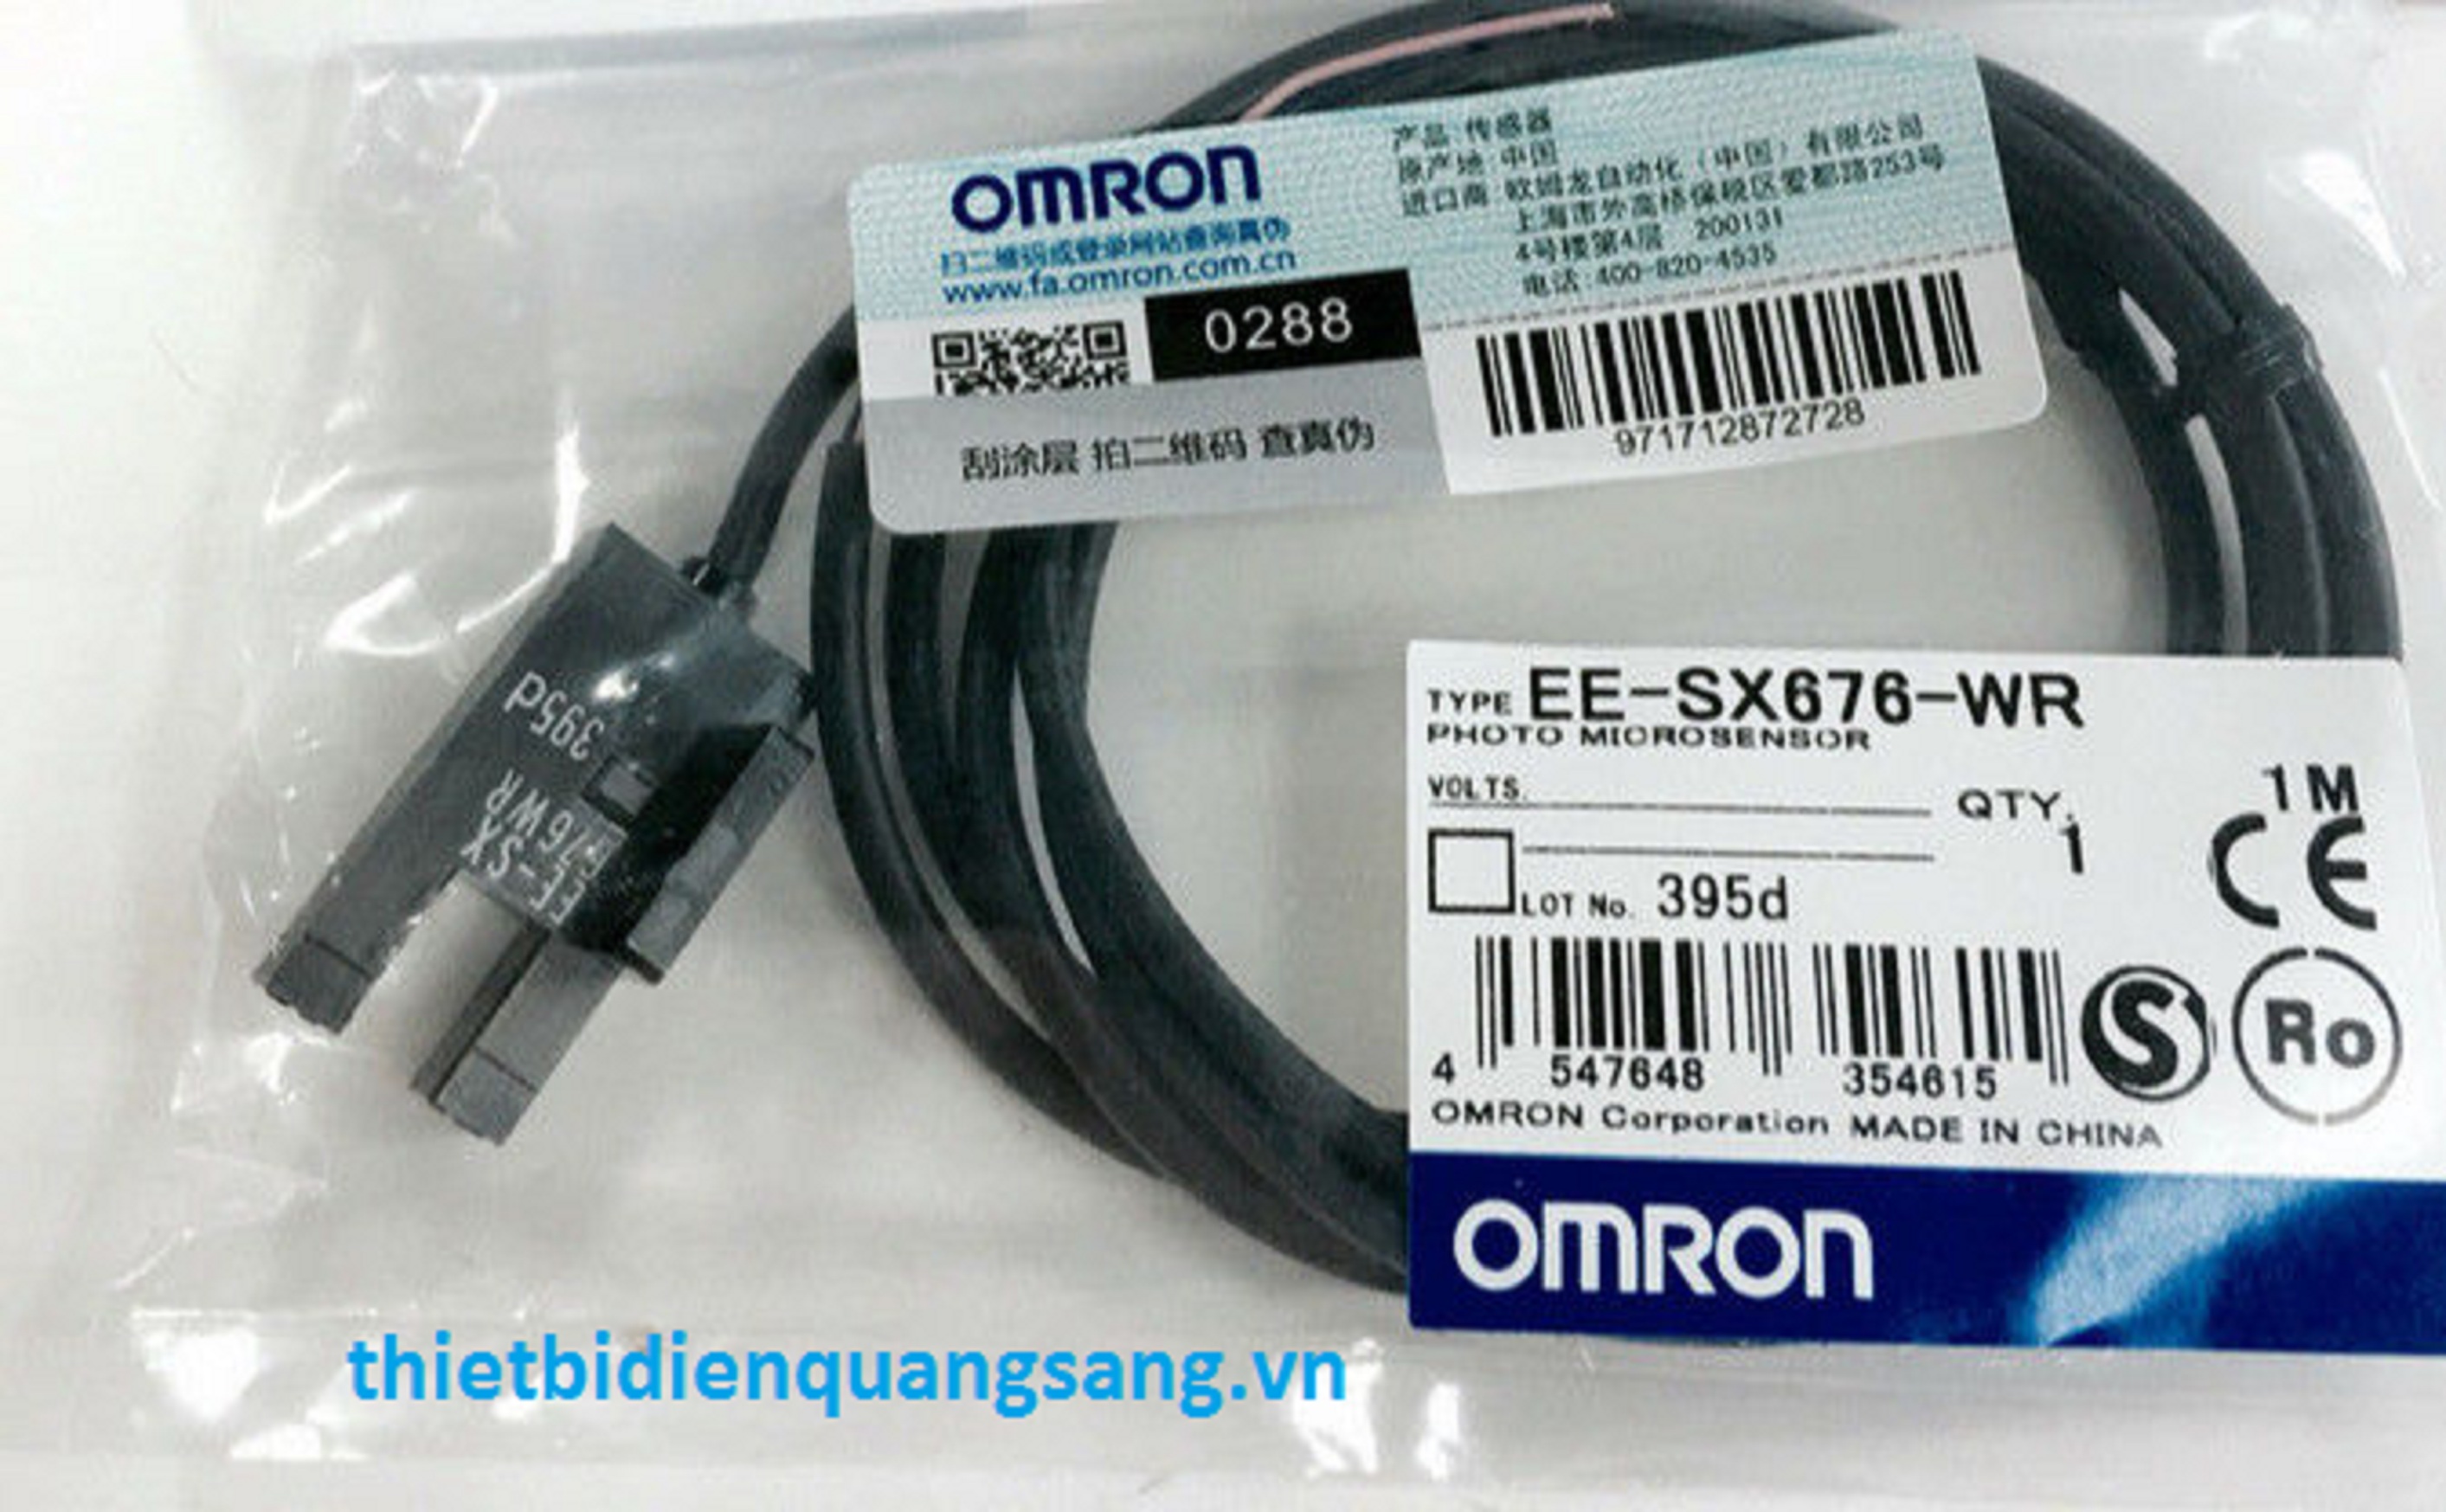 Omron EE-SX676-WR